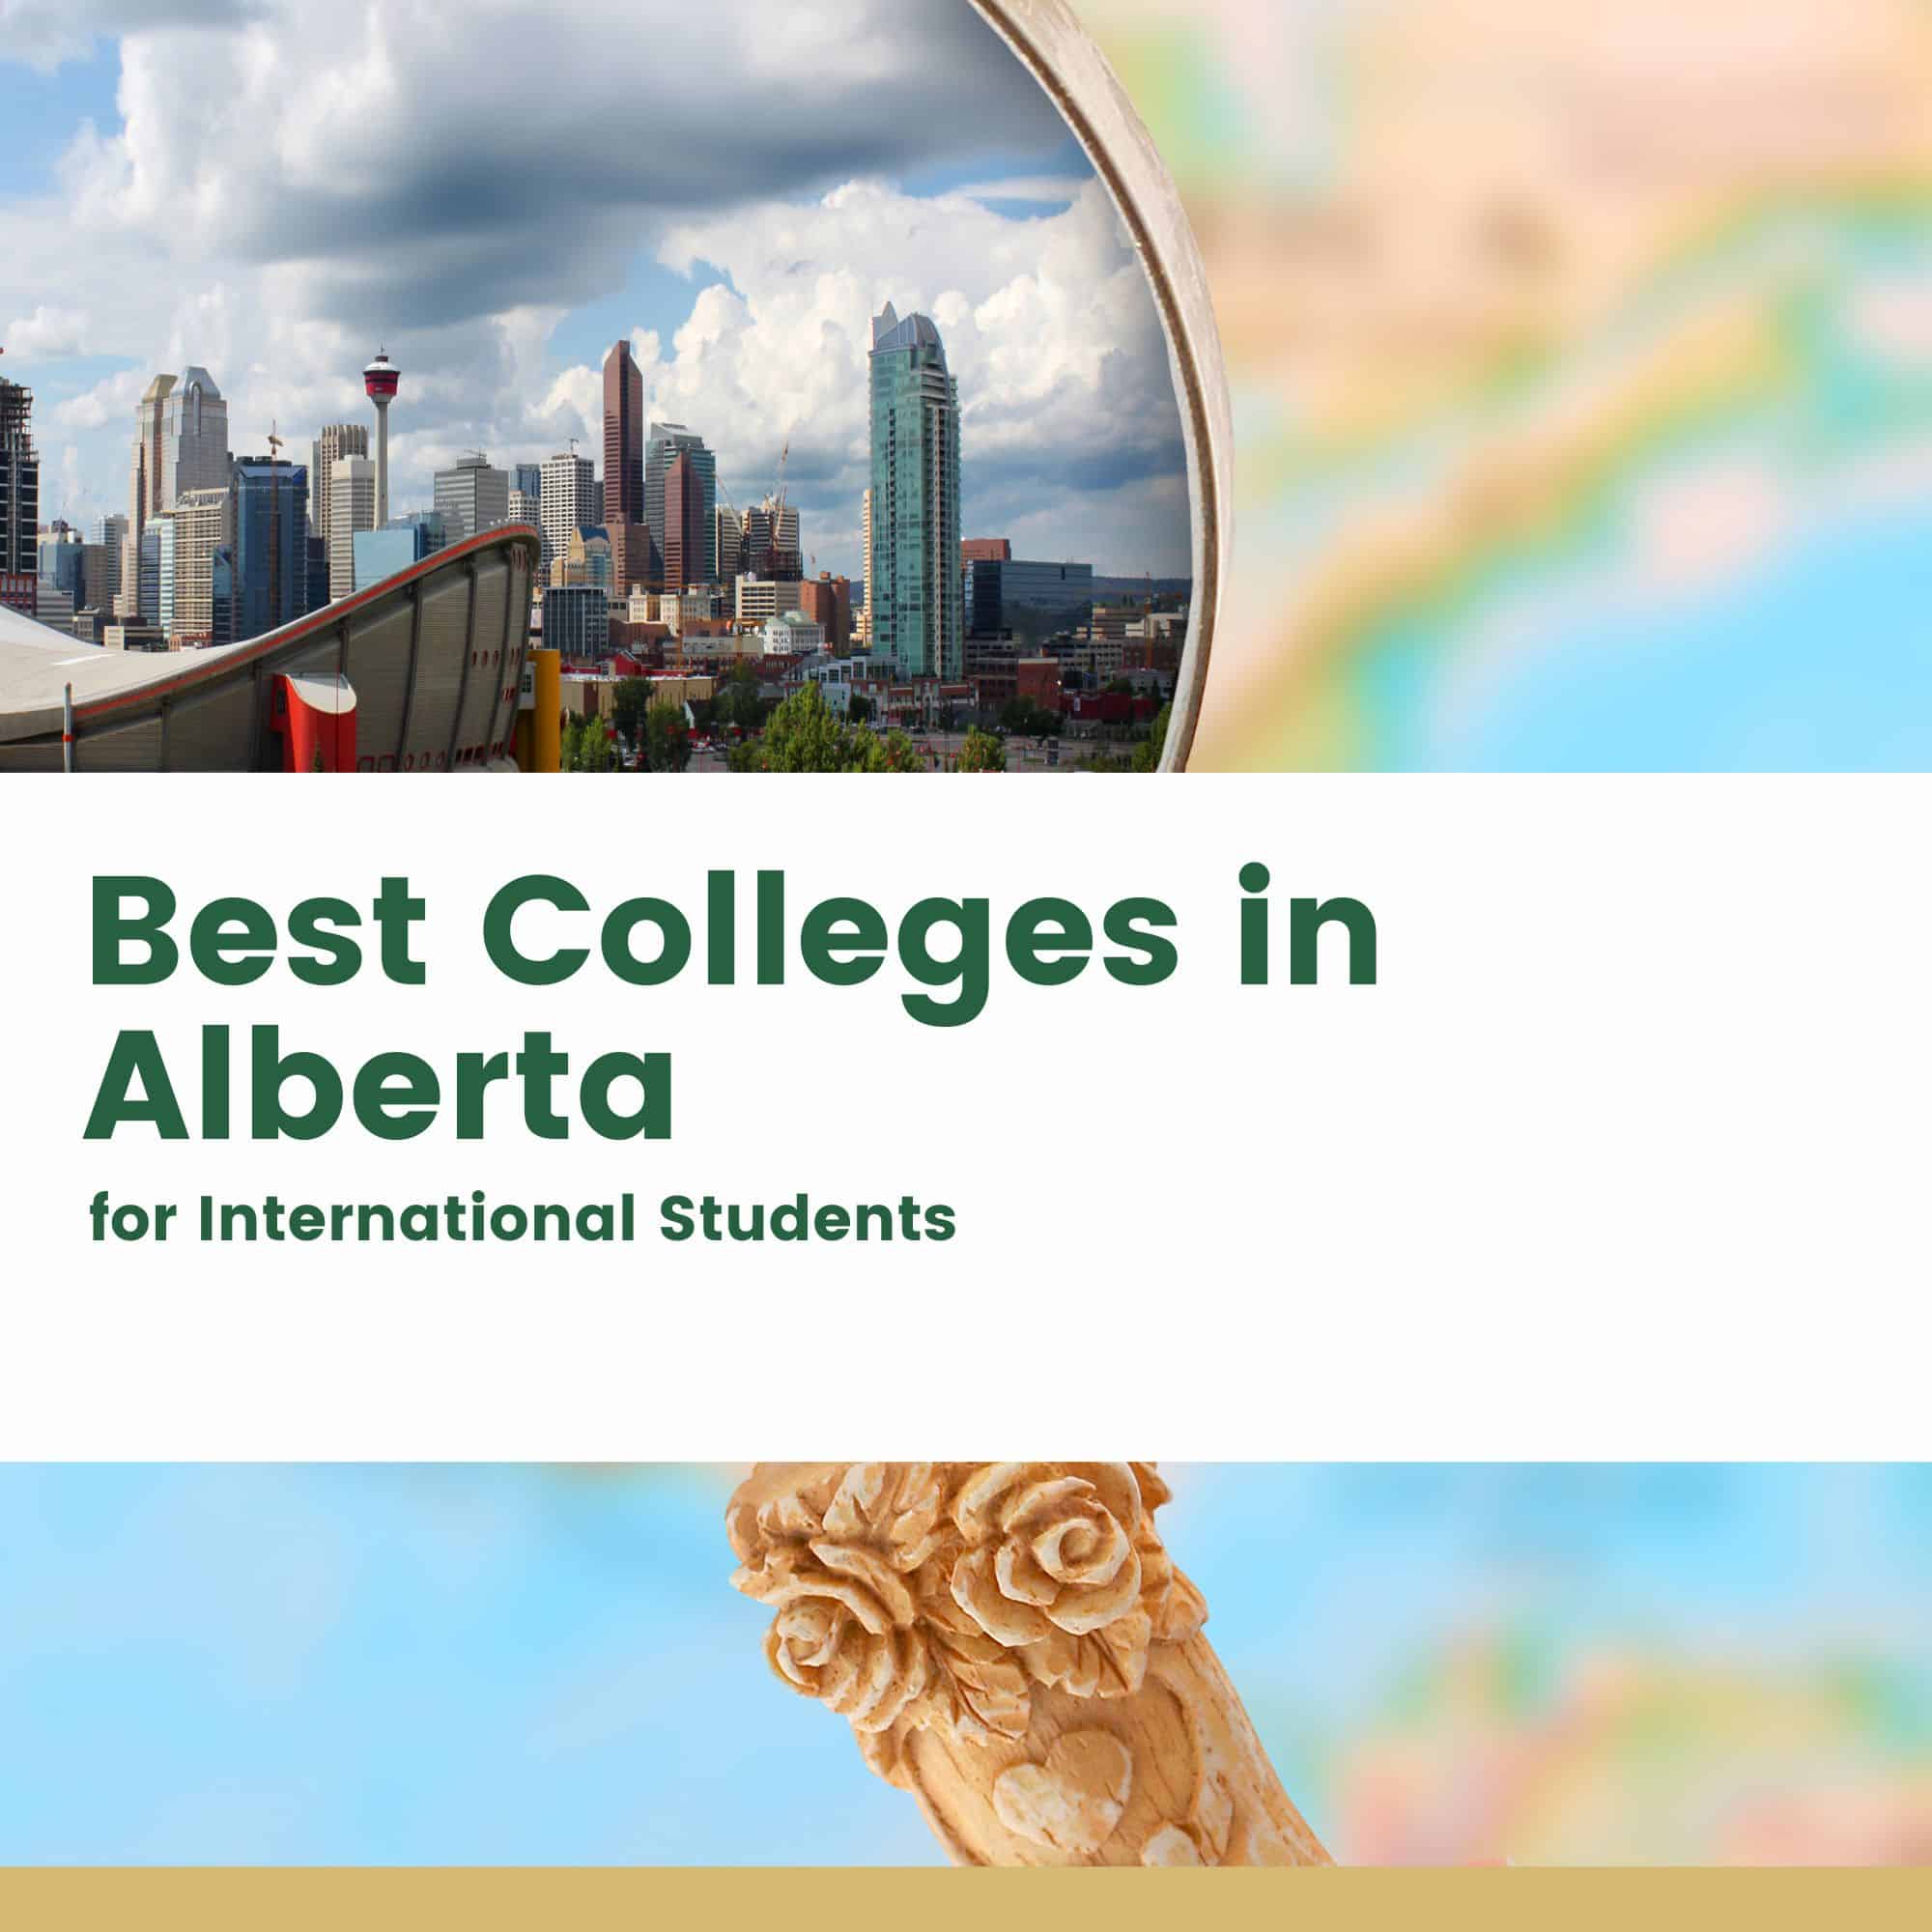 Best Colleges in Alberta for International Students